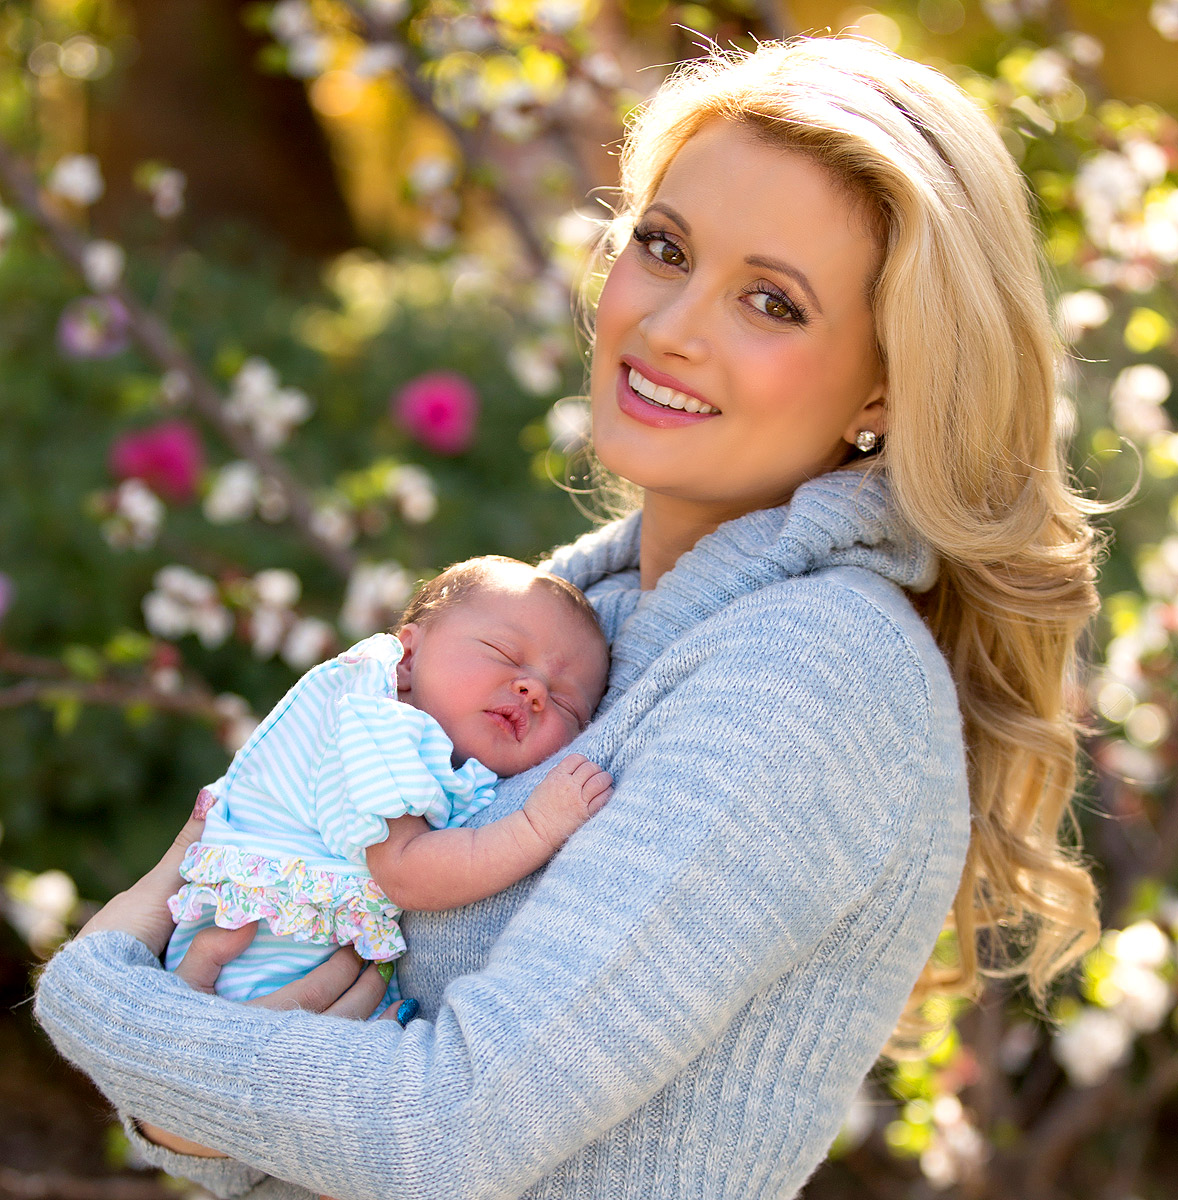 Holly Madison Reveals Her Baby Boy's Name! - Mum's Lounge1178 x 1200